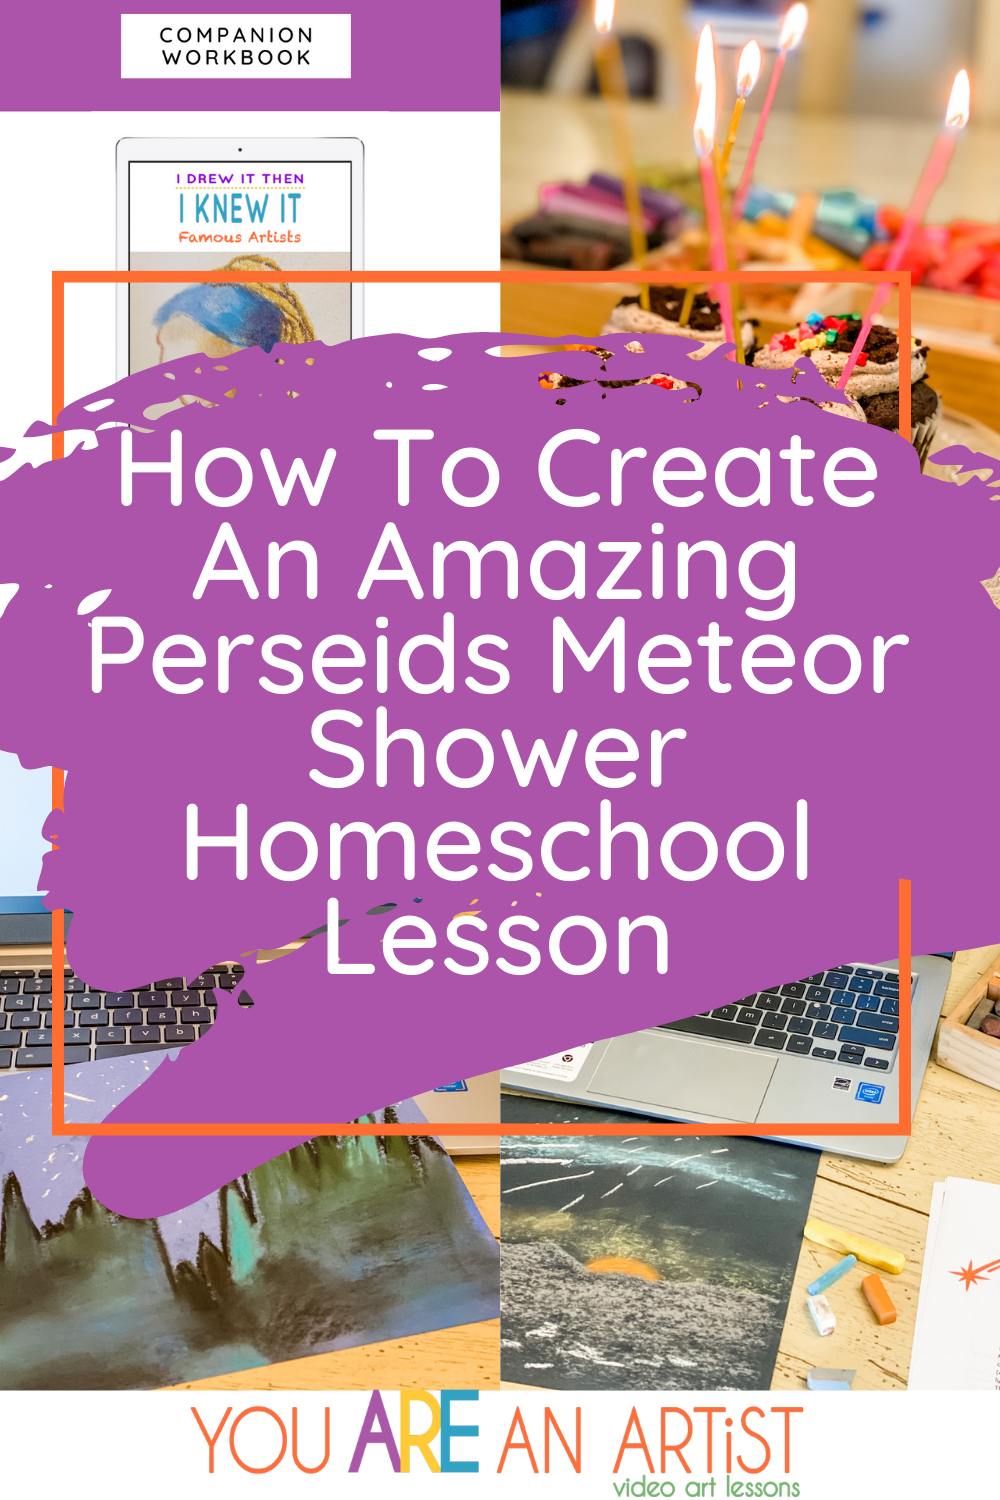 A Perseids Meteor Shower Homeschool Lesson is perfect for summer! So many ideas here to help you make a memorable learning experience at home! #perseids #meteorshower #homeschool #homeschoollessonplans 